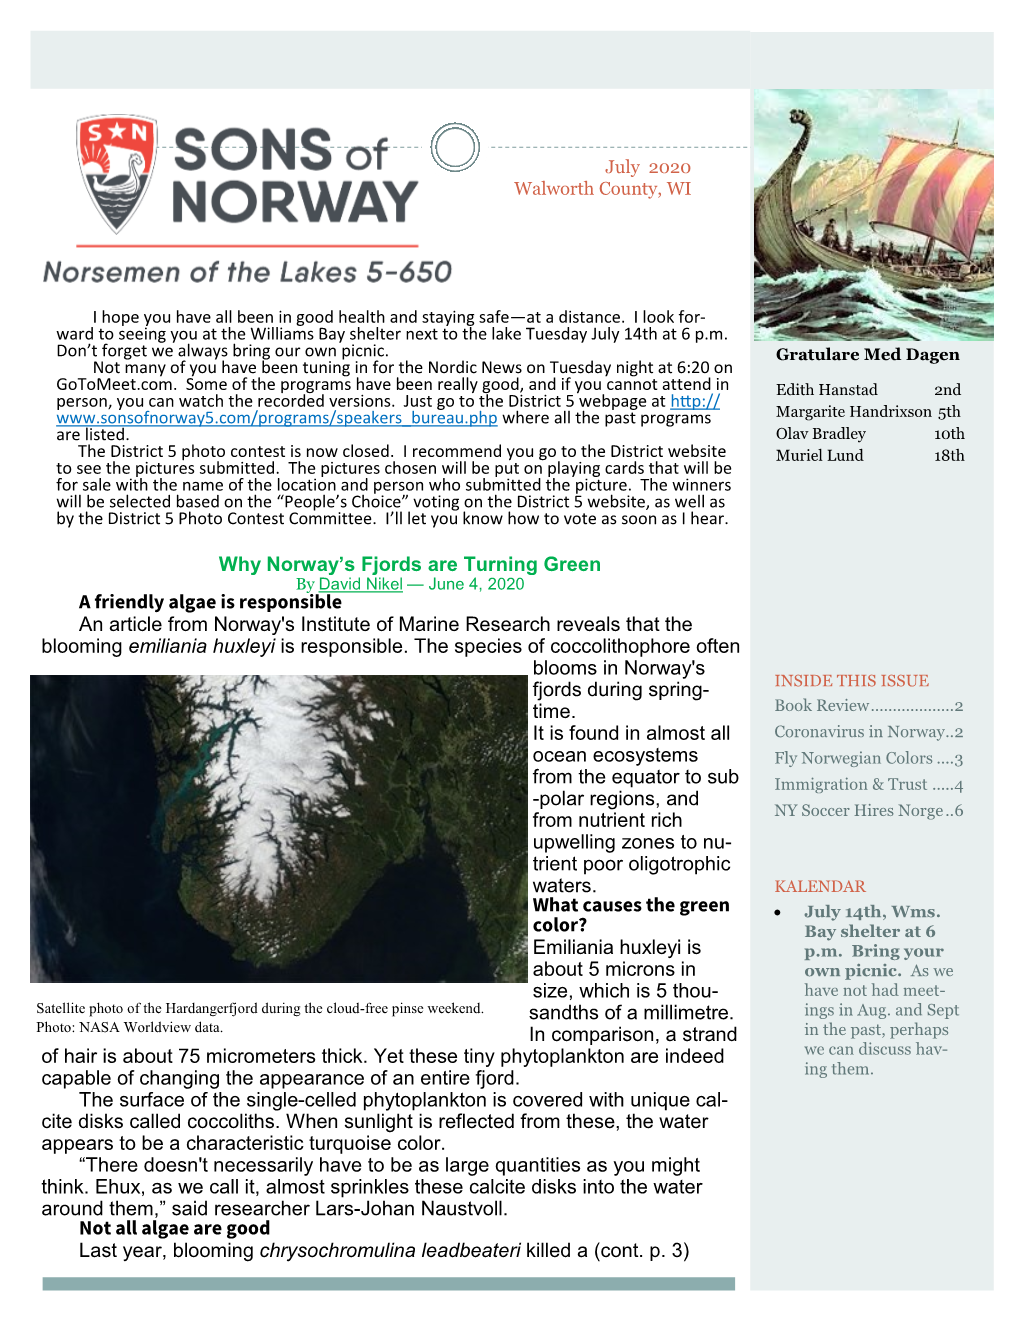 Norsemen of the Lakes Newsletter July, 2020